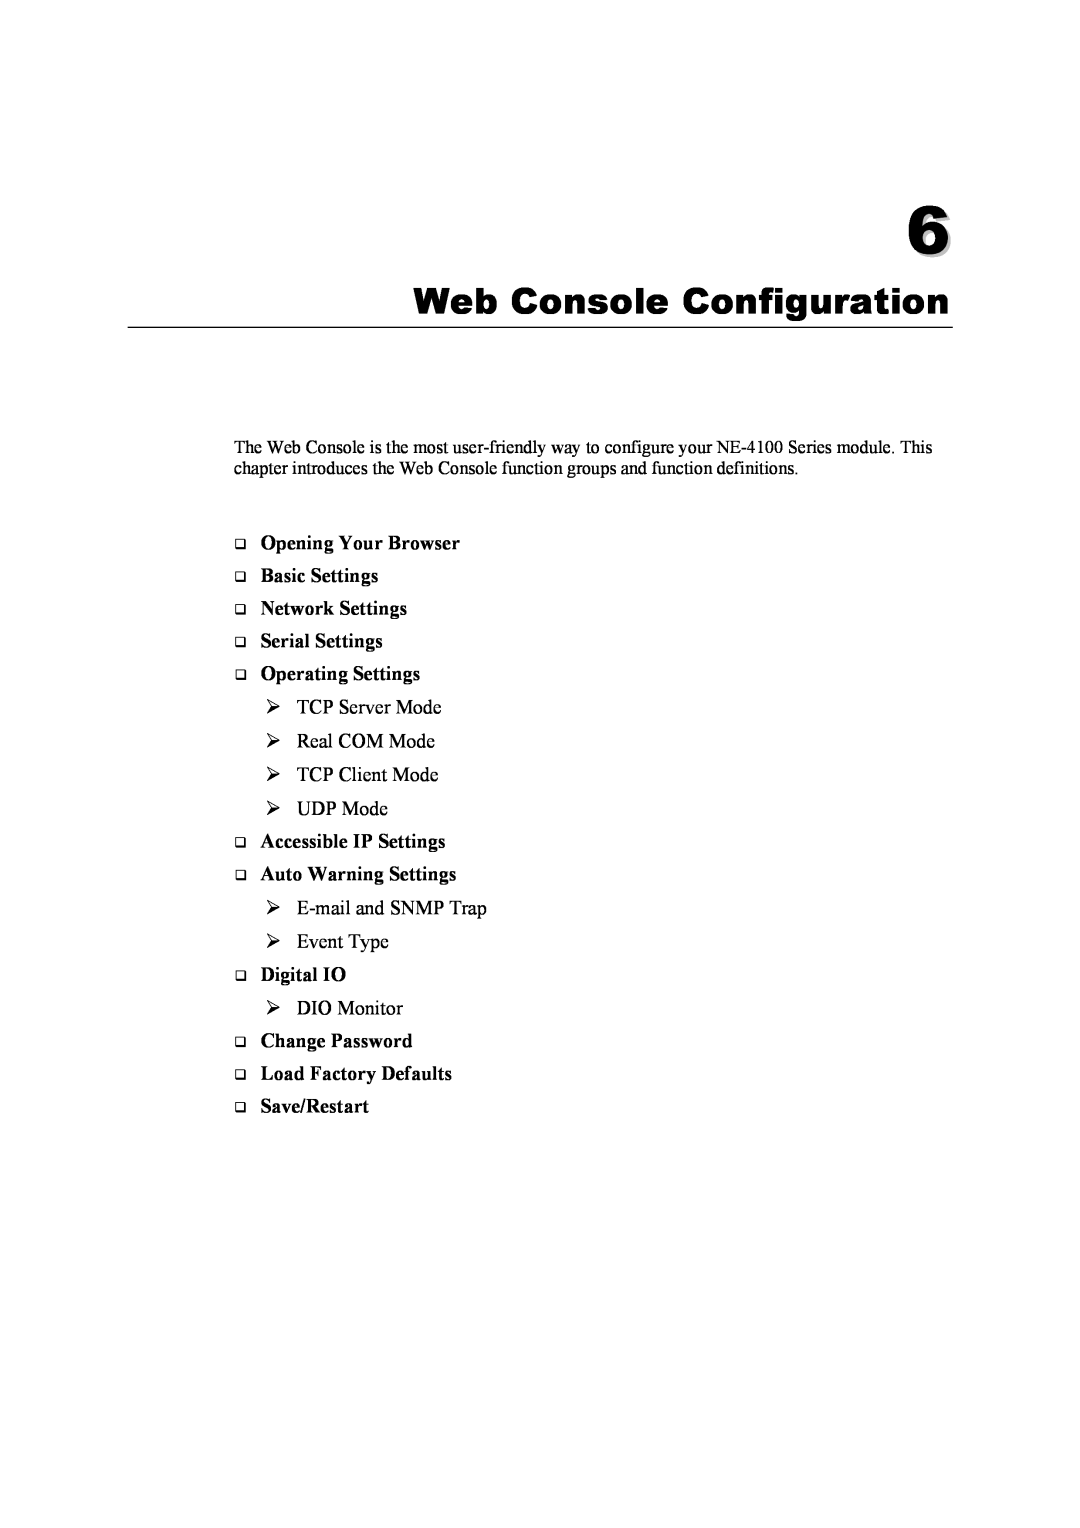 Moxa Technologies NE-4100 Web Console Configuration, Opening Your Browser Basic Settings Network Settings Serial Settings 